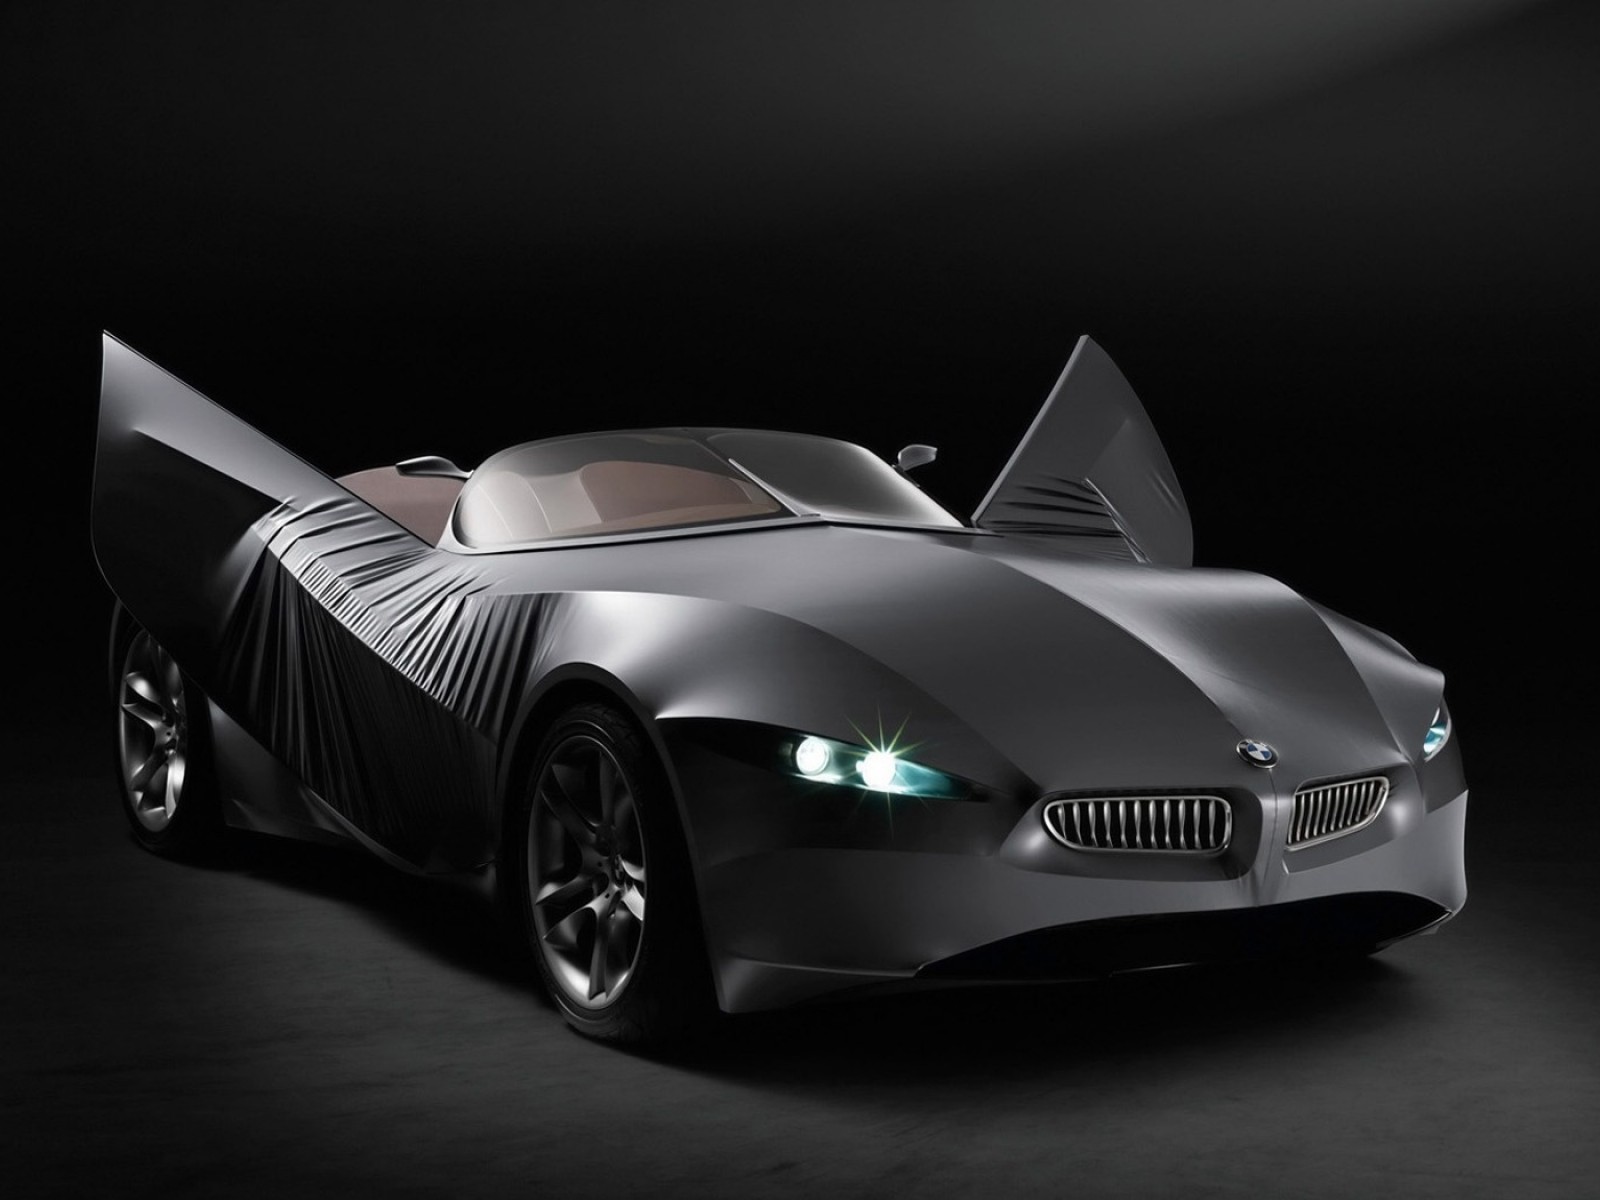 Free Cars HD Wallpapers: Bmw Gina Concept Cars HD Wallpapers